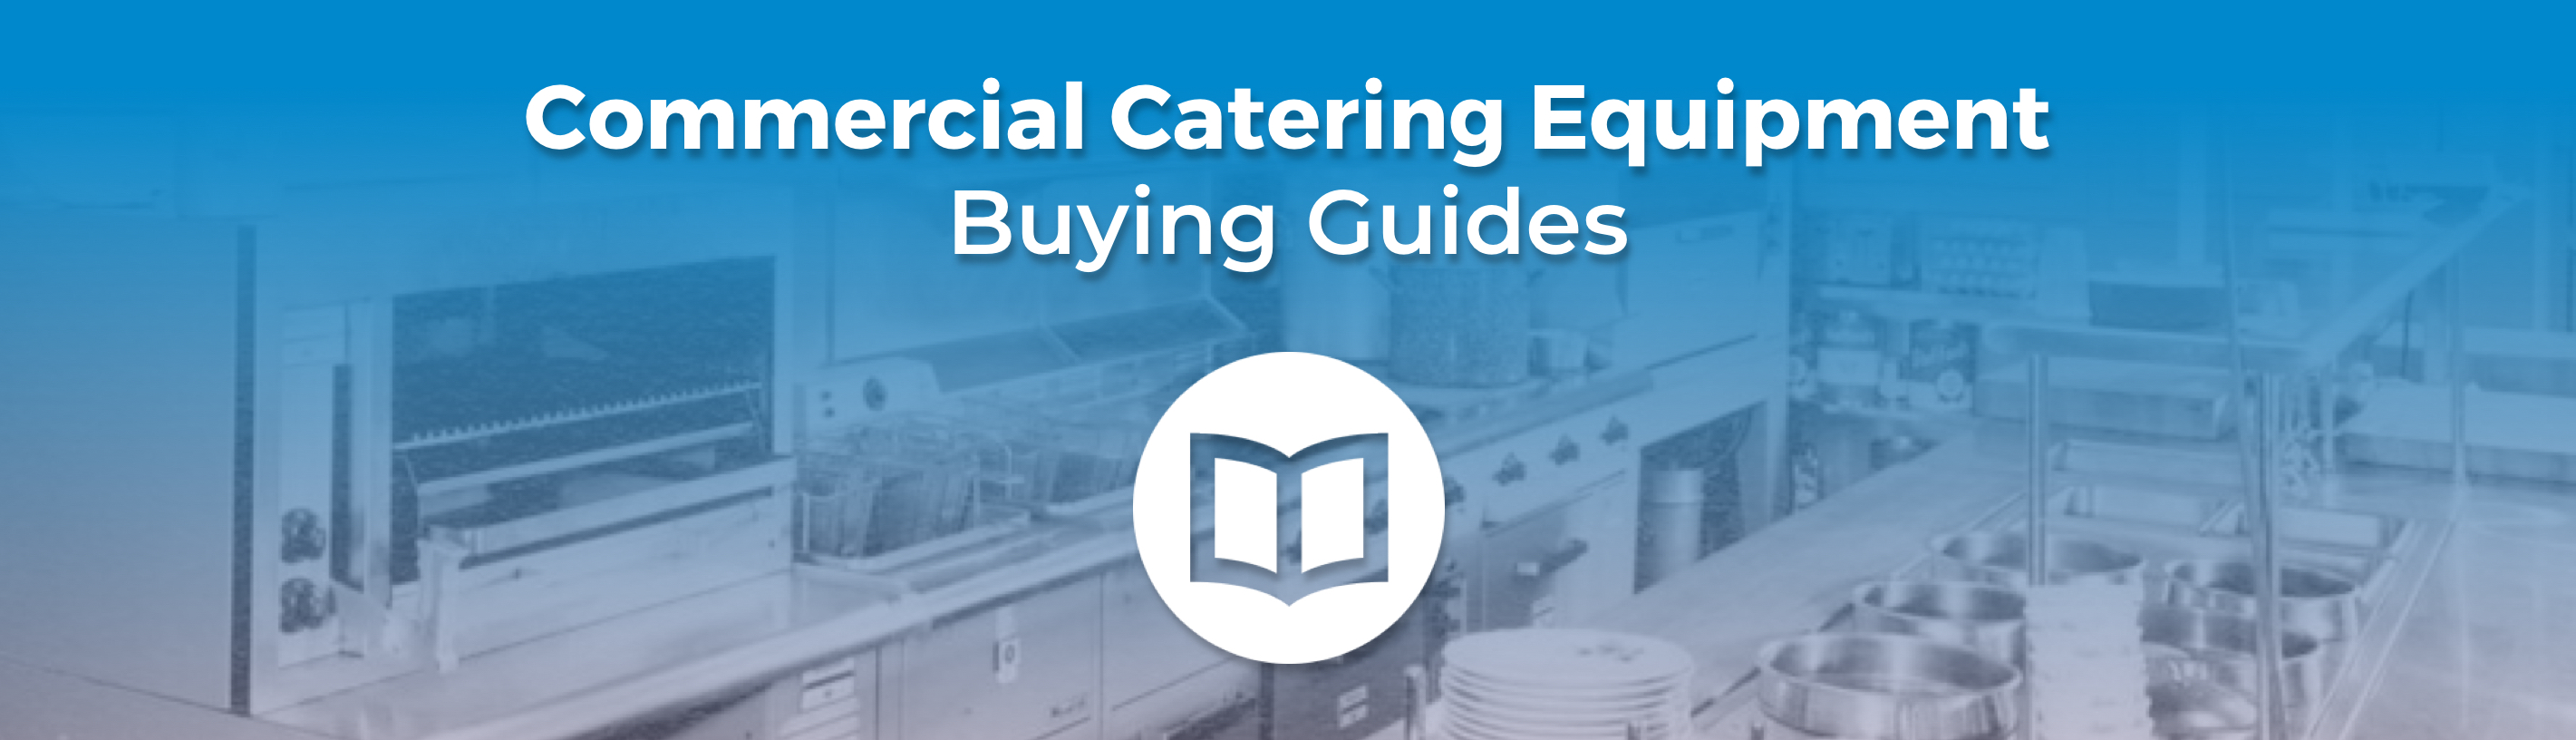 Commercial Catering Equipment Buying Guides